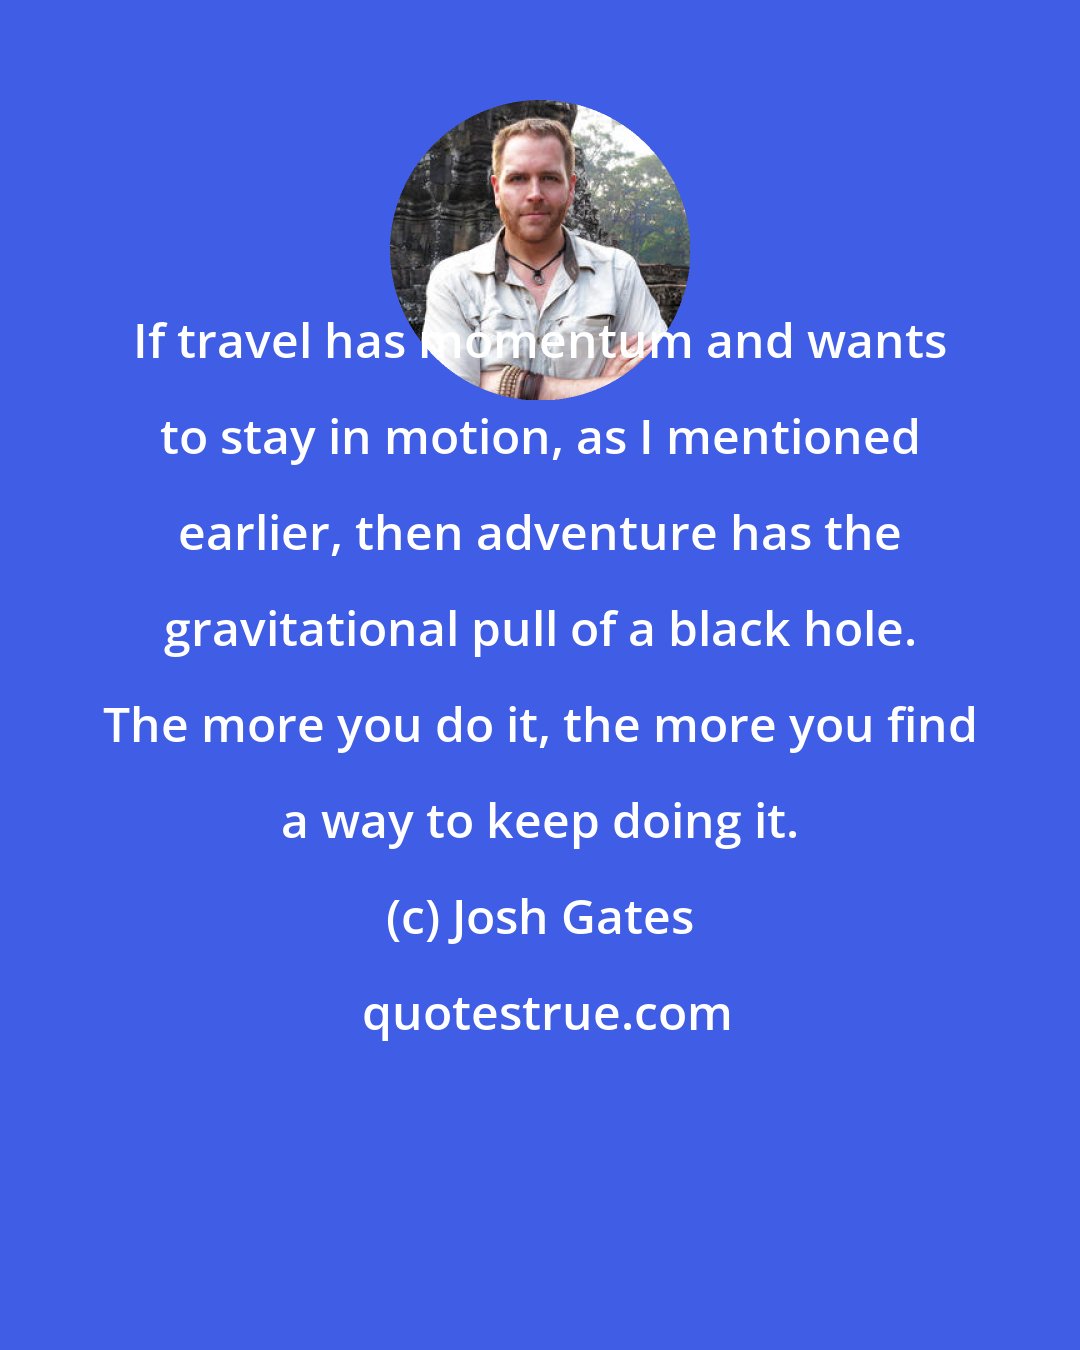 Josh Gates: If travel has momentum and wants to stay in motion, as I mentioned earlier, then adventure has the gravitational pull of a black hole. The more you do it, the more you find a way to keep doing it.